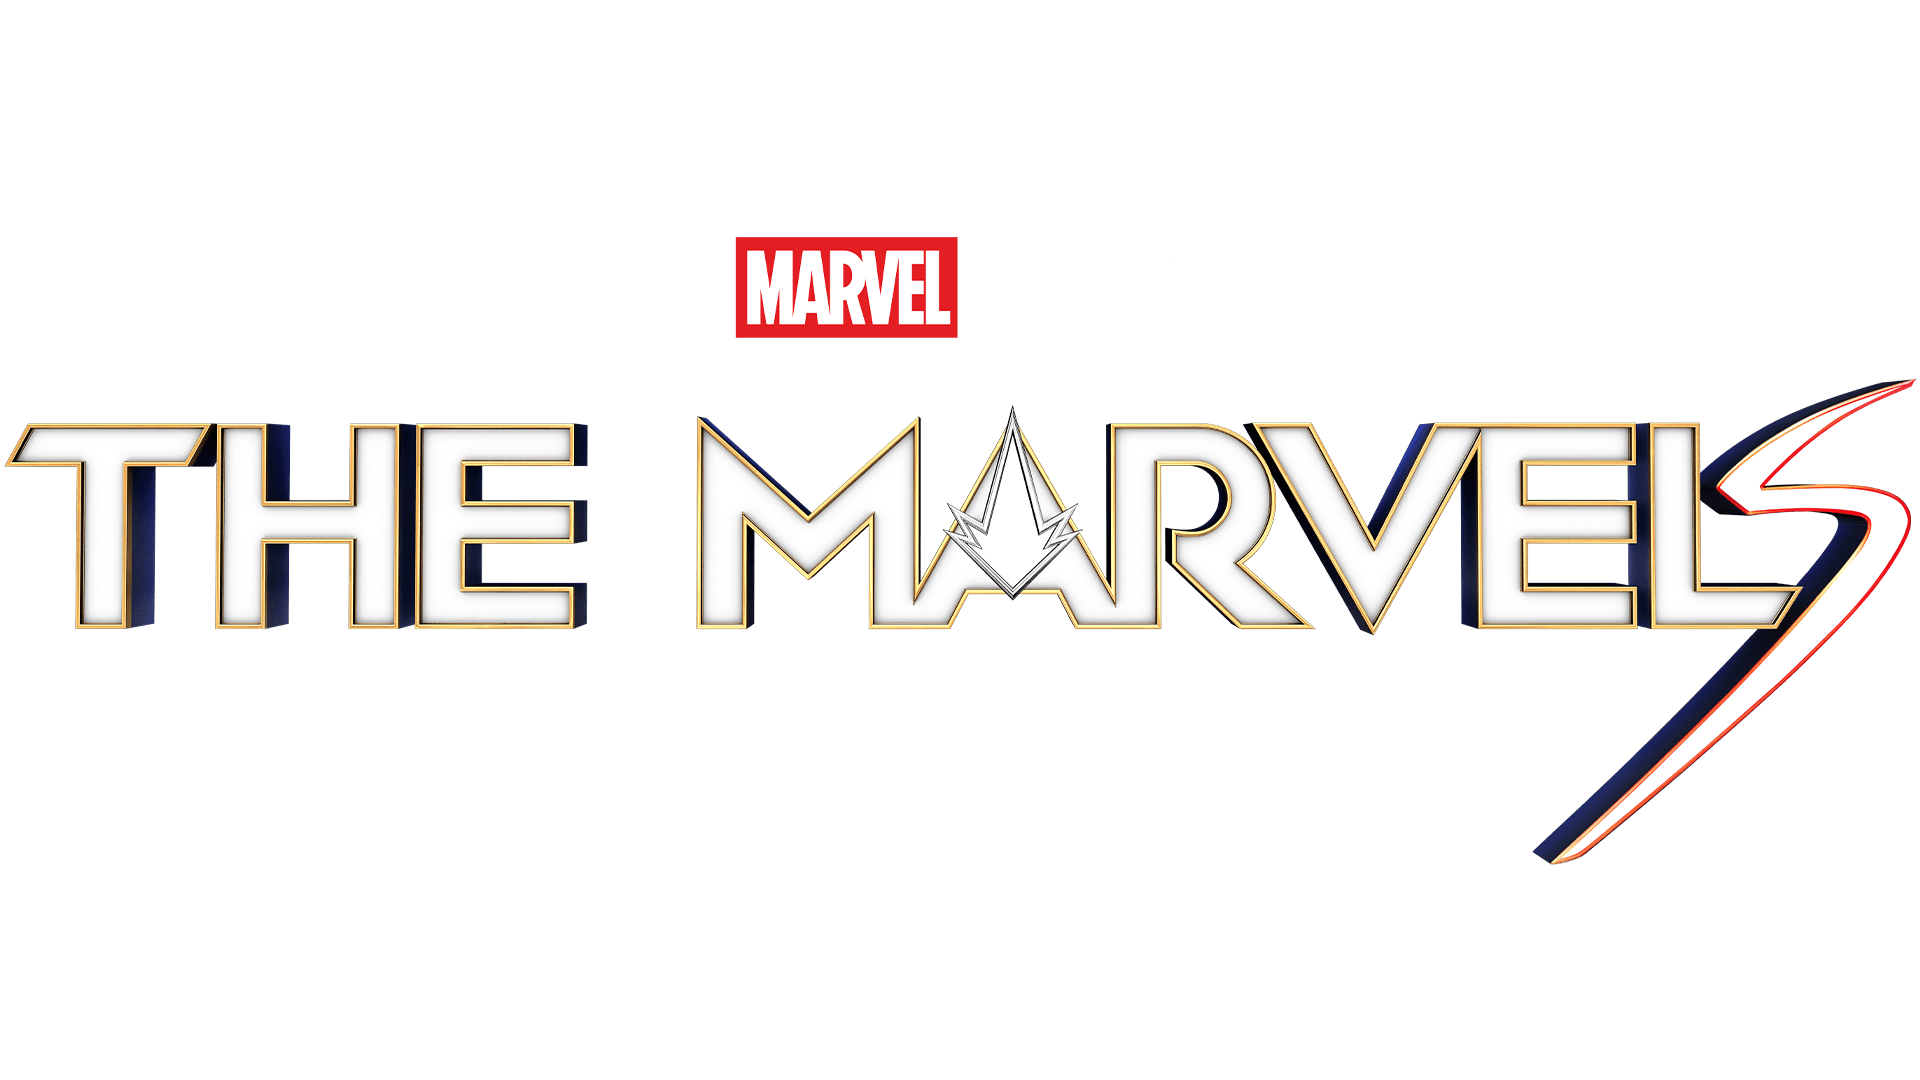 Watch The Marvels